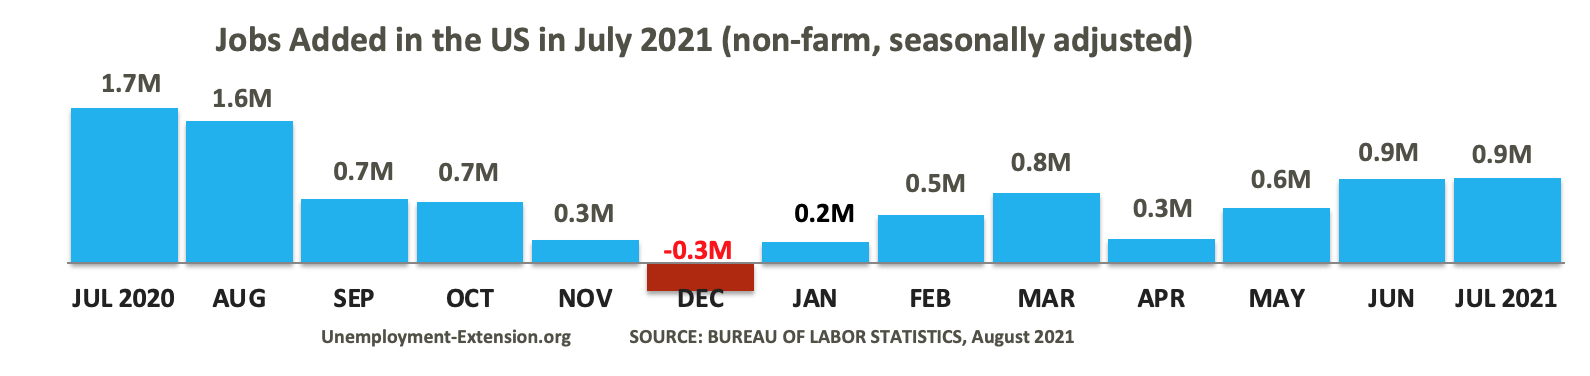 13 months, +943,000 new jobs were added to the US economy in July 2021